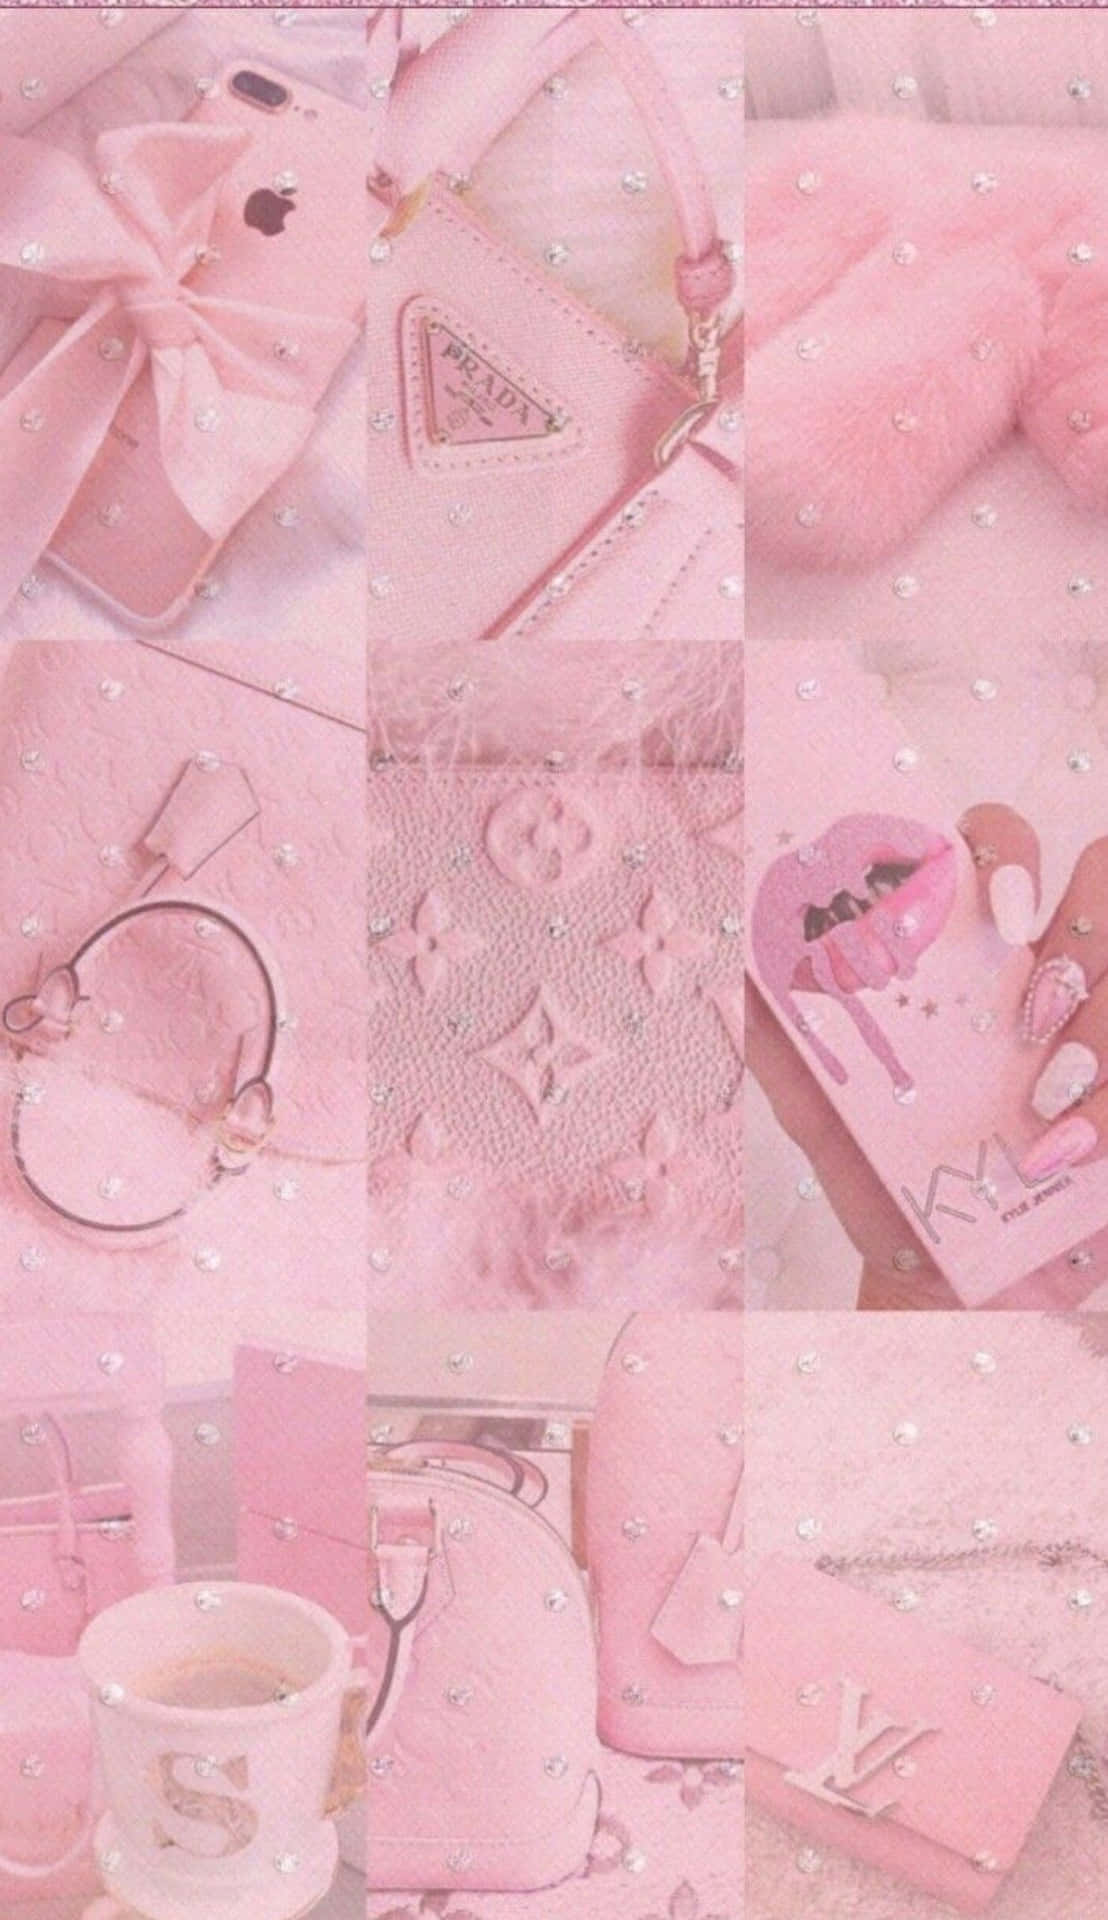 Aesthetic Pink Collage Of Designers Bags